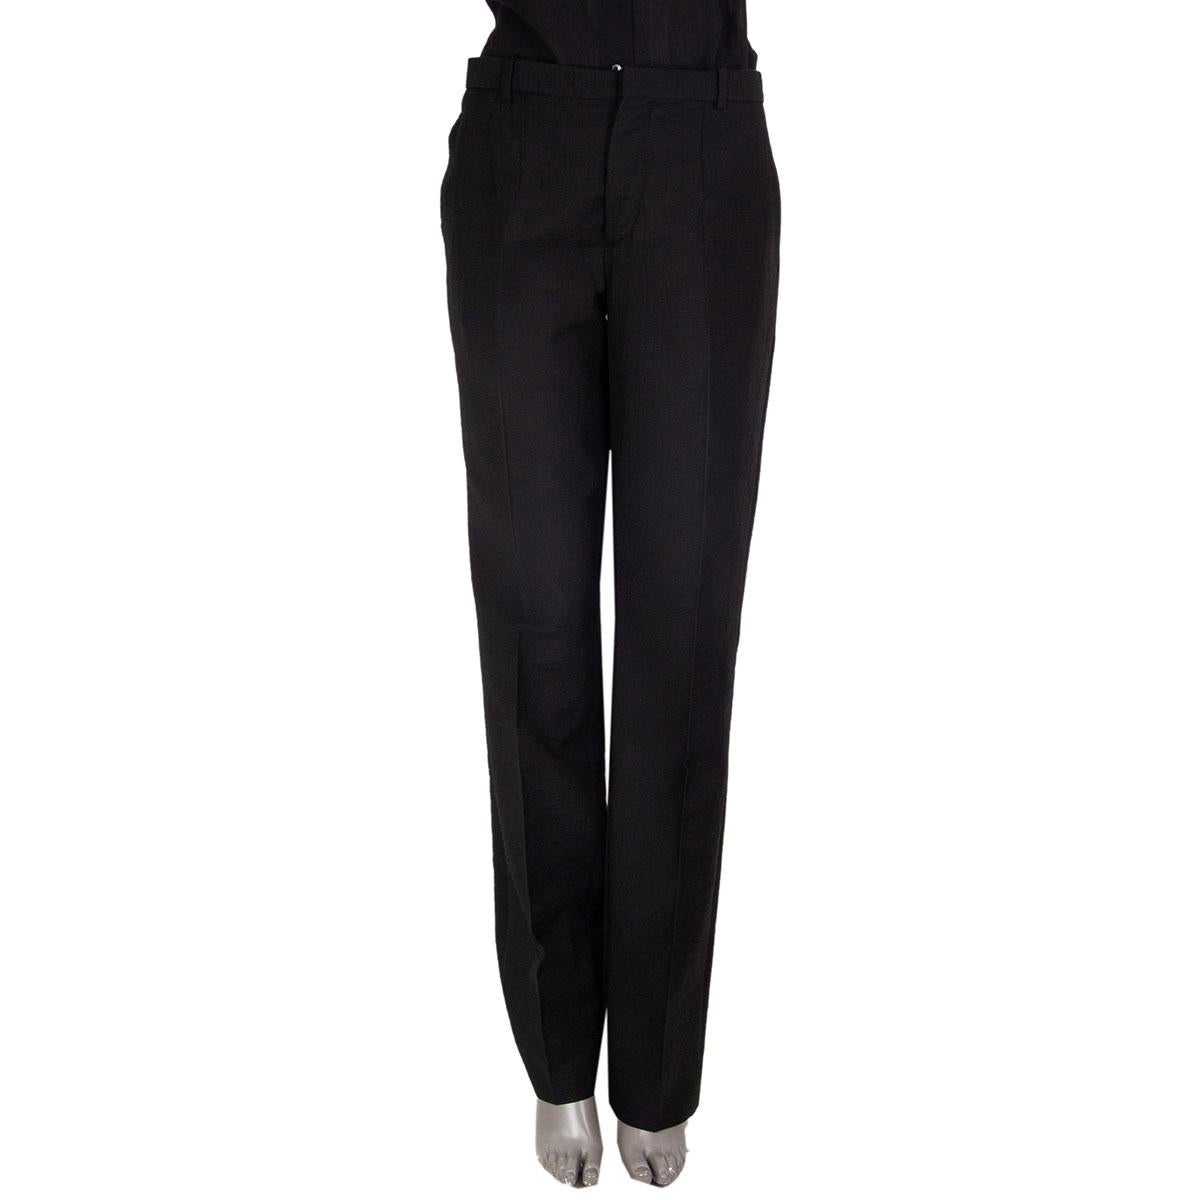 100% authentic Marni tapered pants in black wool (59%), mohair (26%) and nylon (15%) with pockets. Close on the front with buttons. Lined in acetate (50%), cotton (30%) and viscose (20%). Have been worn and are in excellent